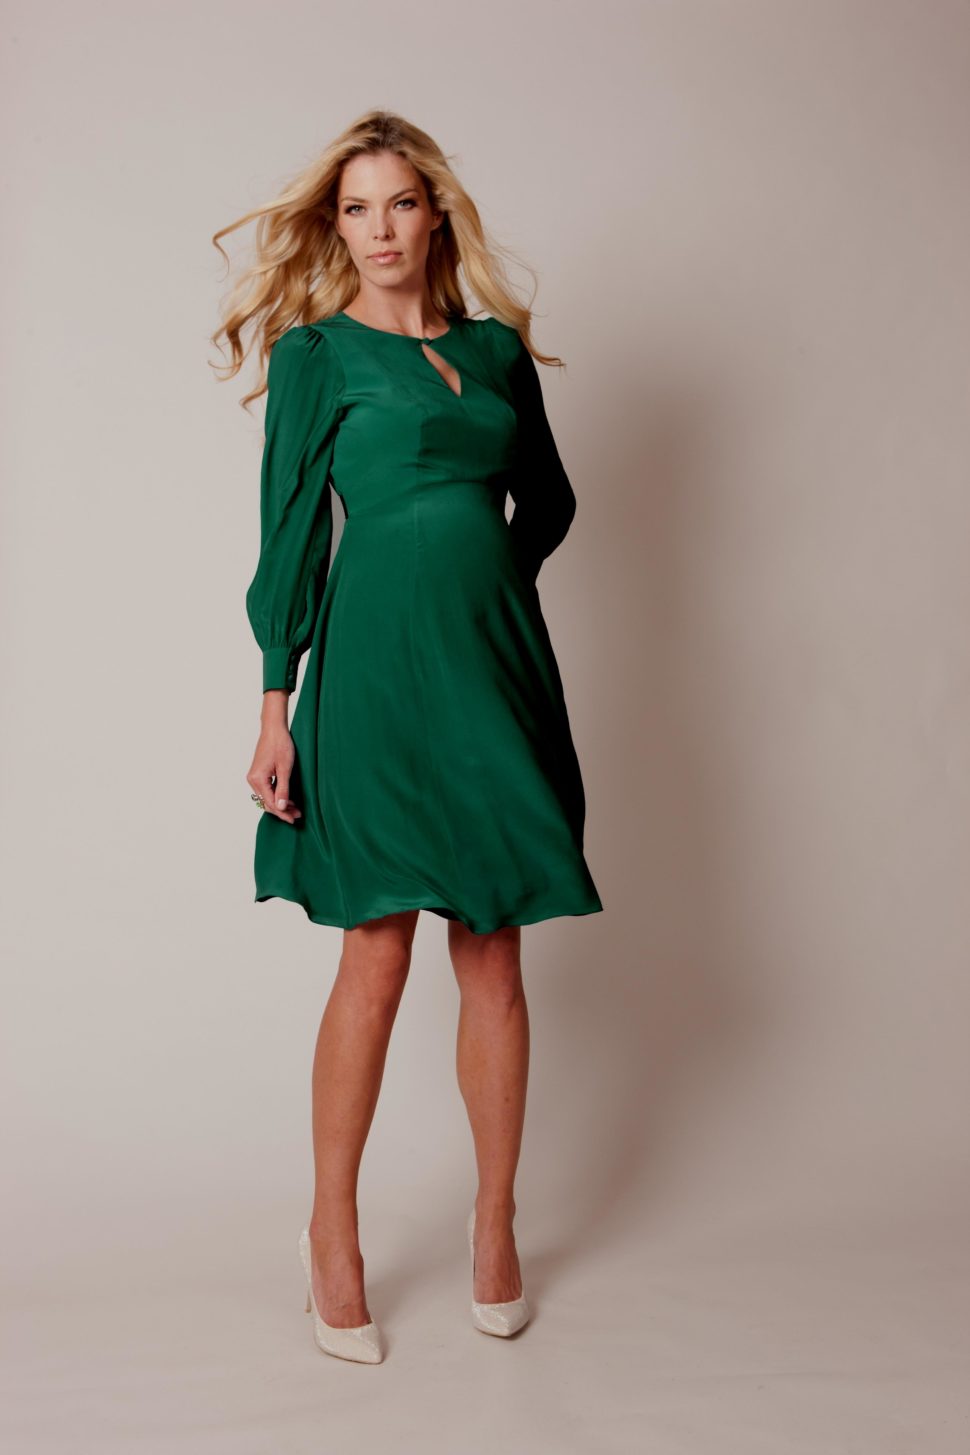 Medium Size of Baby Shower:baby Shower Dresses Trendy Affordable Maternity Clothes Inexpensive Maternity Clothes Maternity Dresses For Photoshoot Baby Shower Attire For Mom Maternity Blouses For Baby Shower Maternity Dresses For Baby Showers Maternity Dresses For Photoshoot